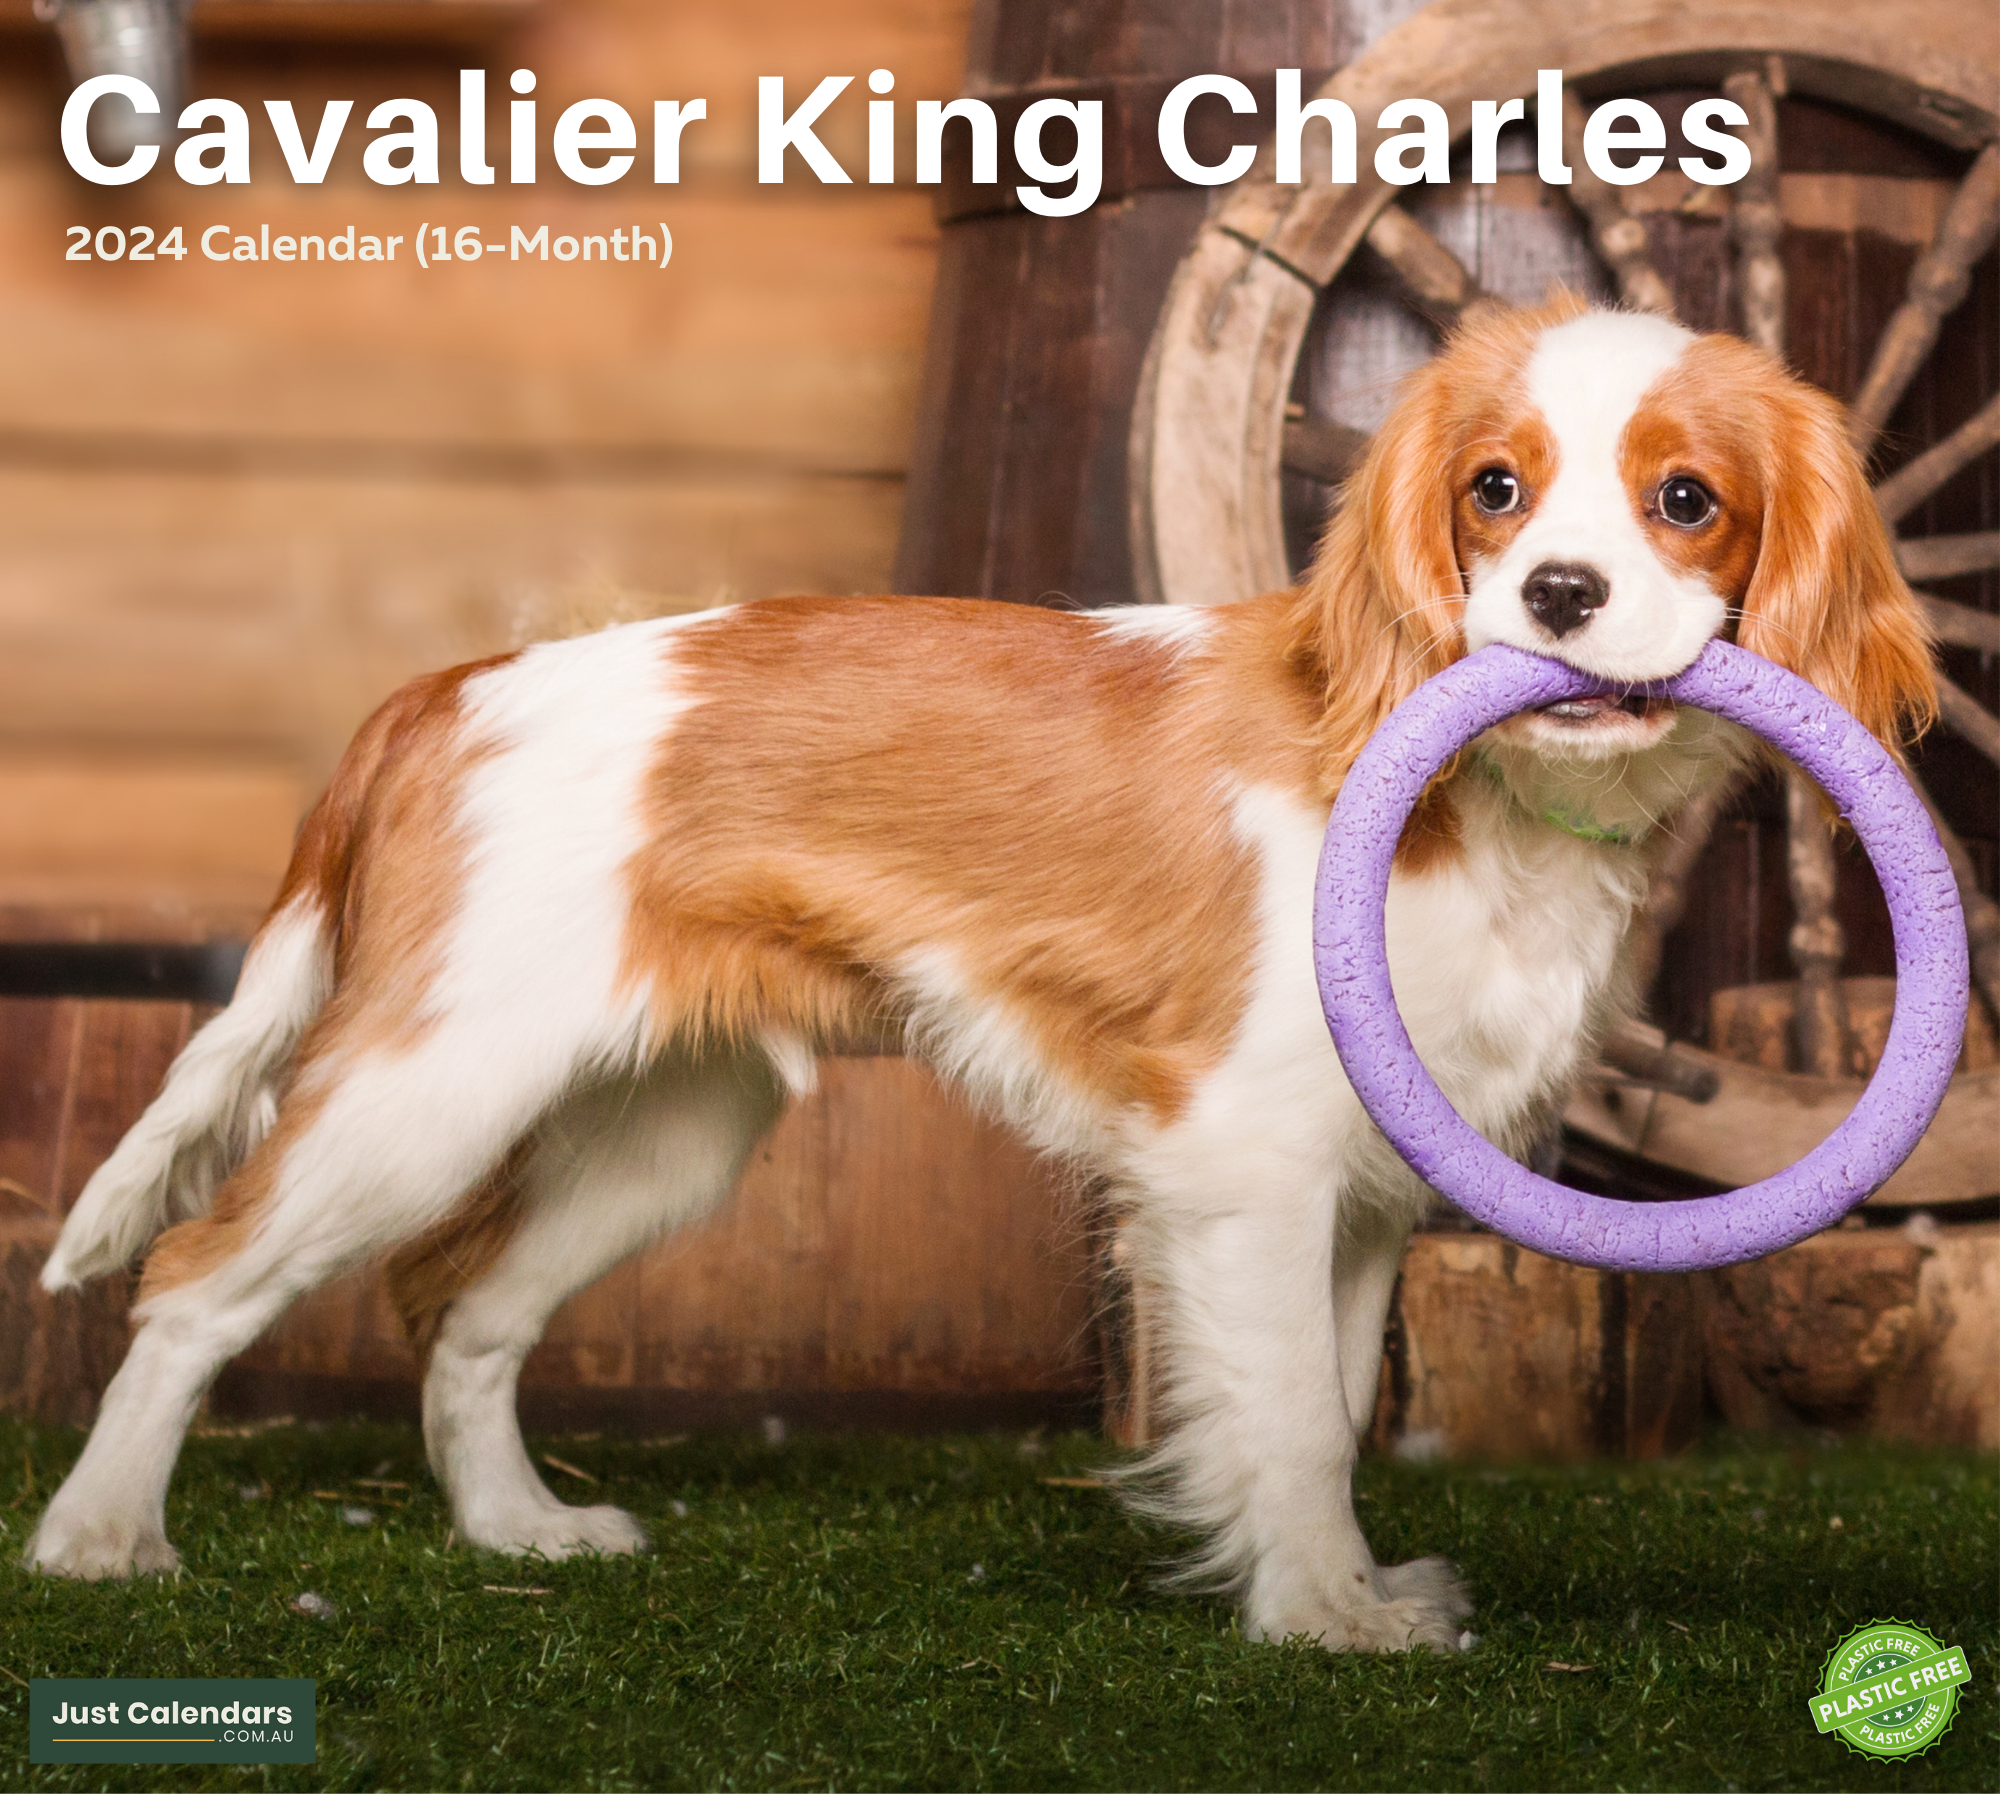 2024 Cavalier King Charles Dogs & Puppies - Deluxe Wall Calendar by Just Calendars - 16 Month - Plastic Free